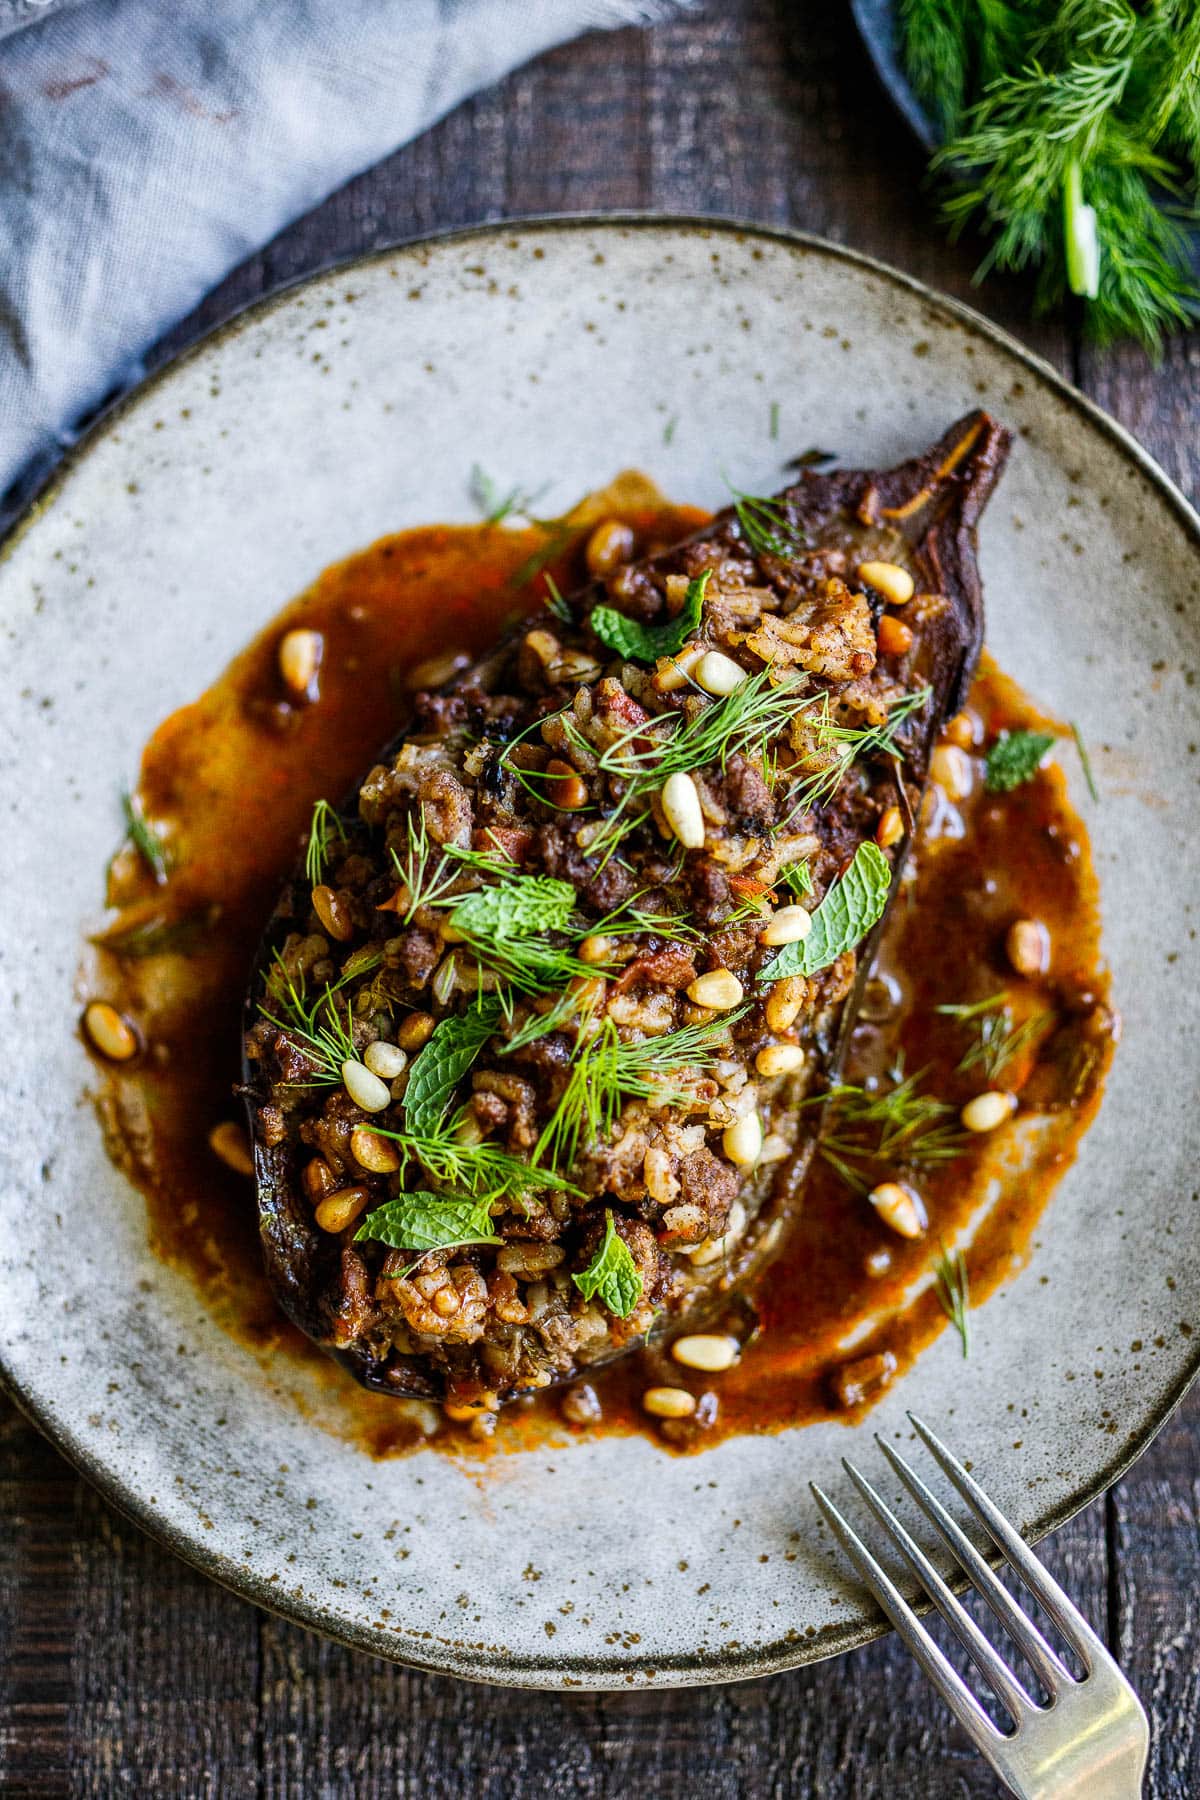 Succulent Stuffed Eggplant infused with Lebanese spices, baked in the oven until meltingly tender. Filled with basmati rice, your choice of ground meat (or lentils) herbs, and pine nuts in a fragrant tomato broth. Vegan-adaptable.